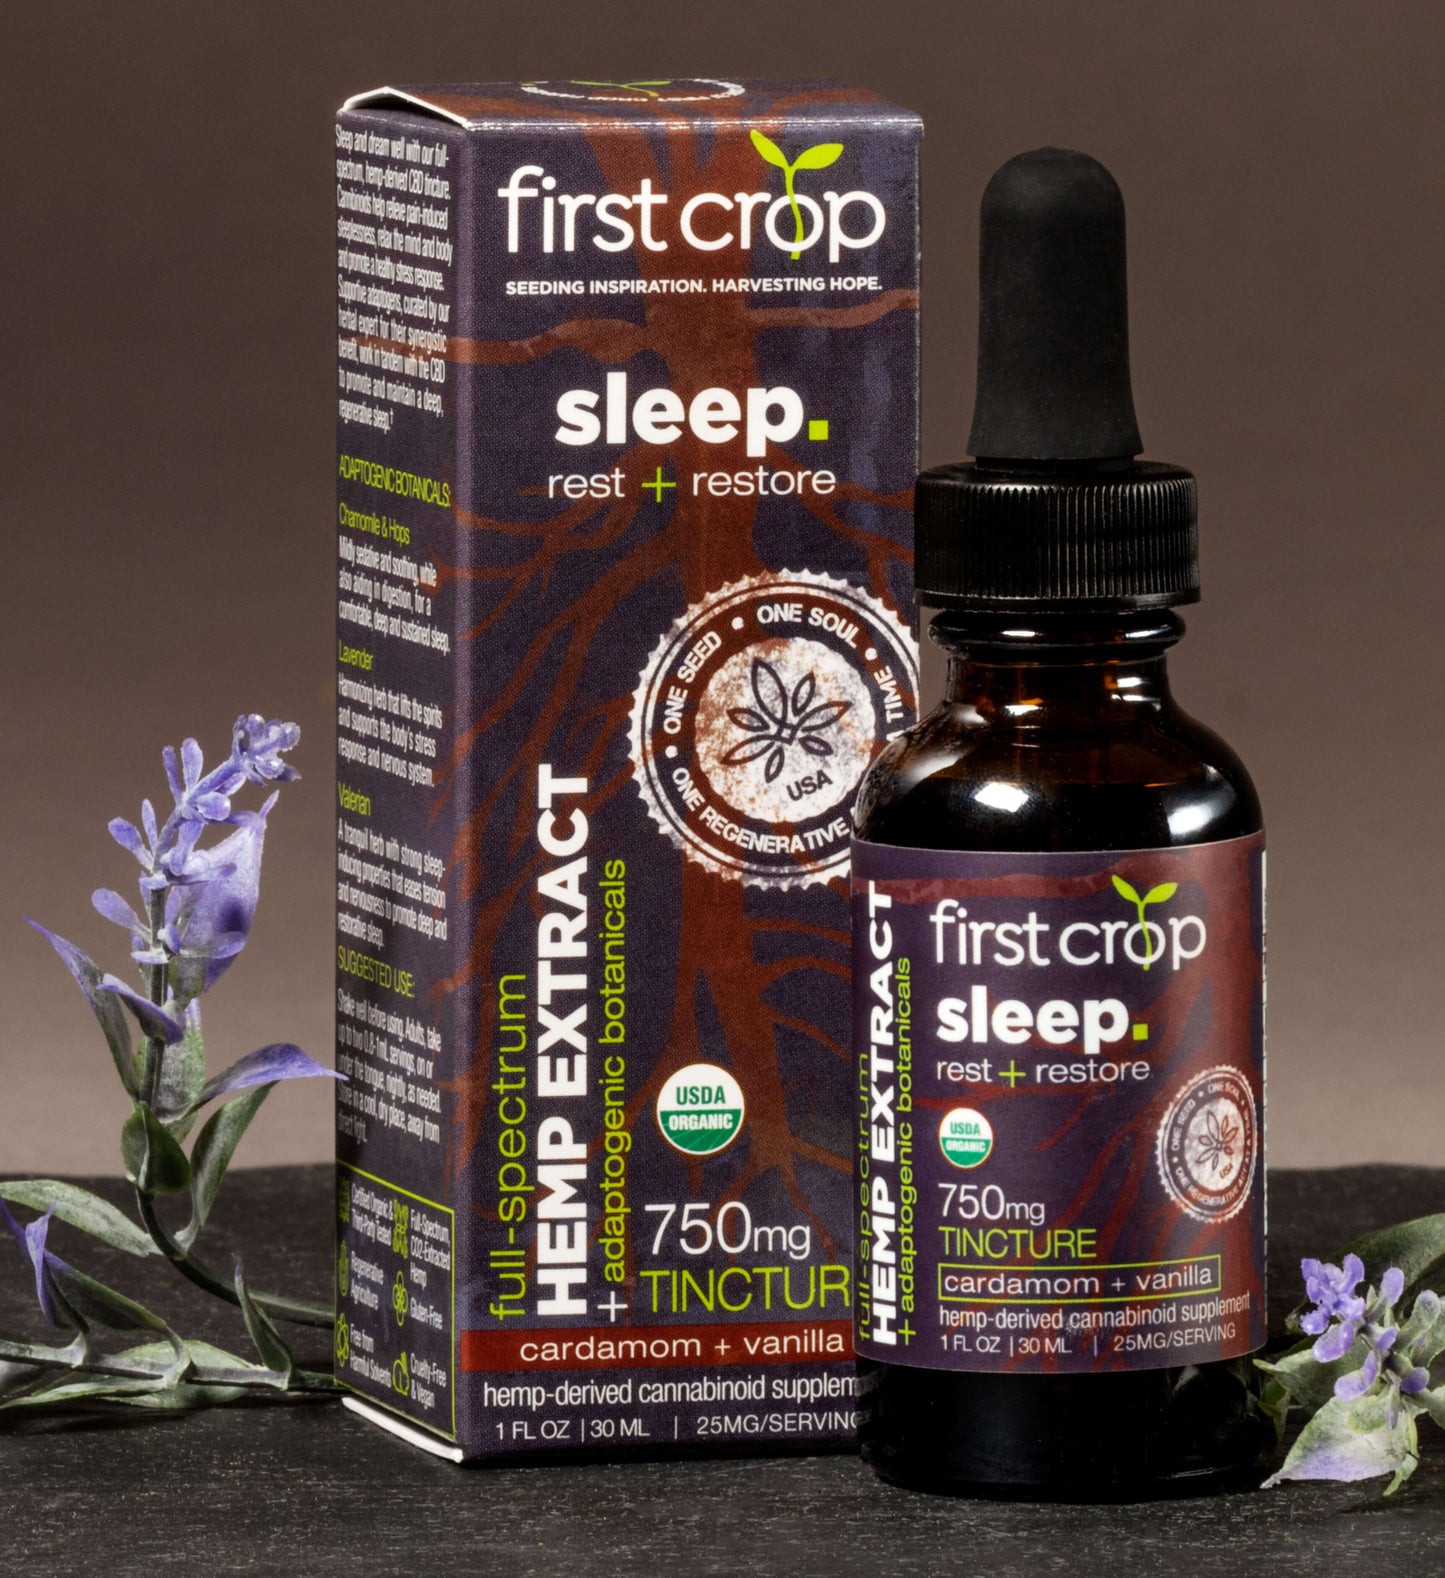 First Crop Full Spectrum Tinctures - 750mg (a Tincture) made by First Crop sold at CBD Emporium